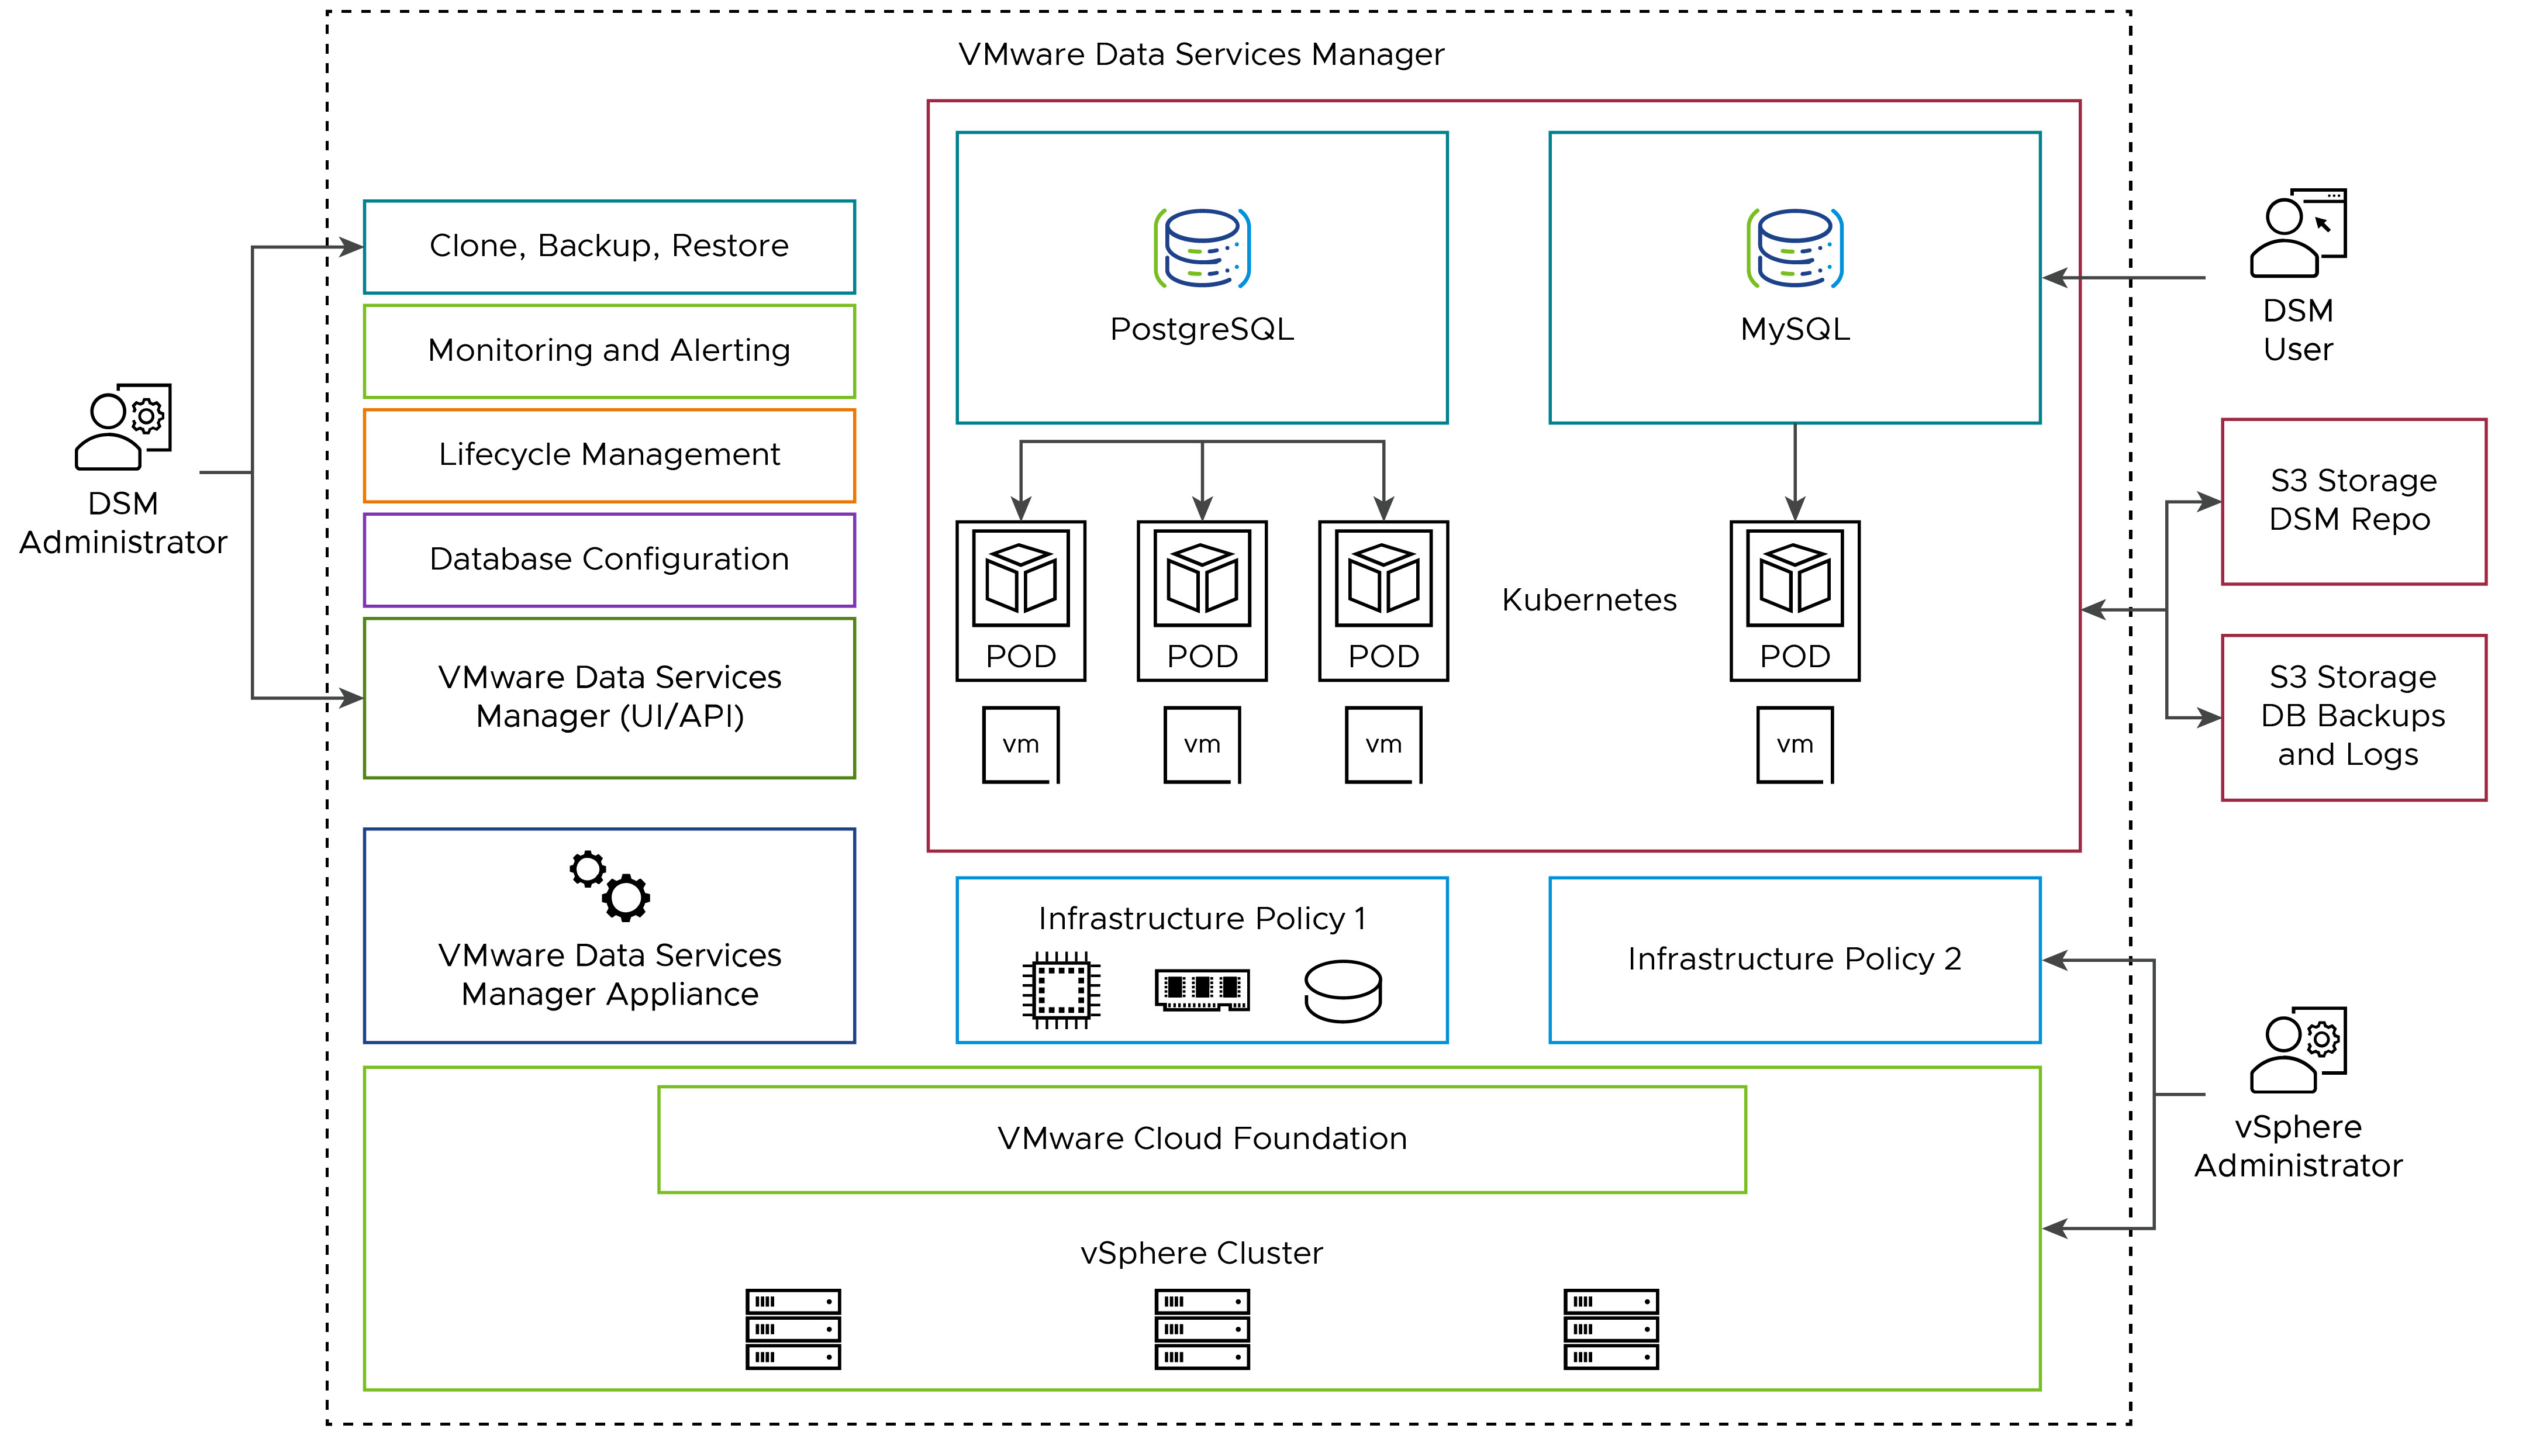 Architecture diagram of VMware Data Services Manager.